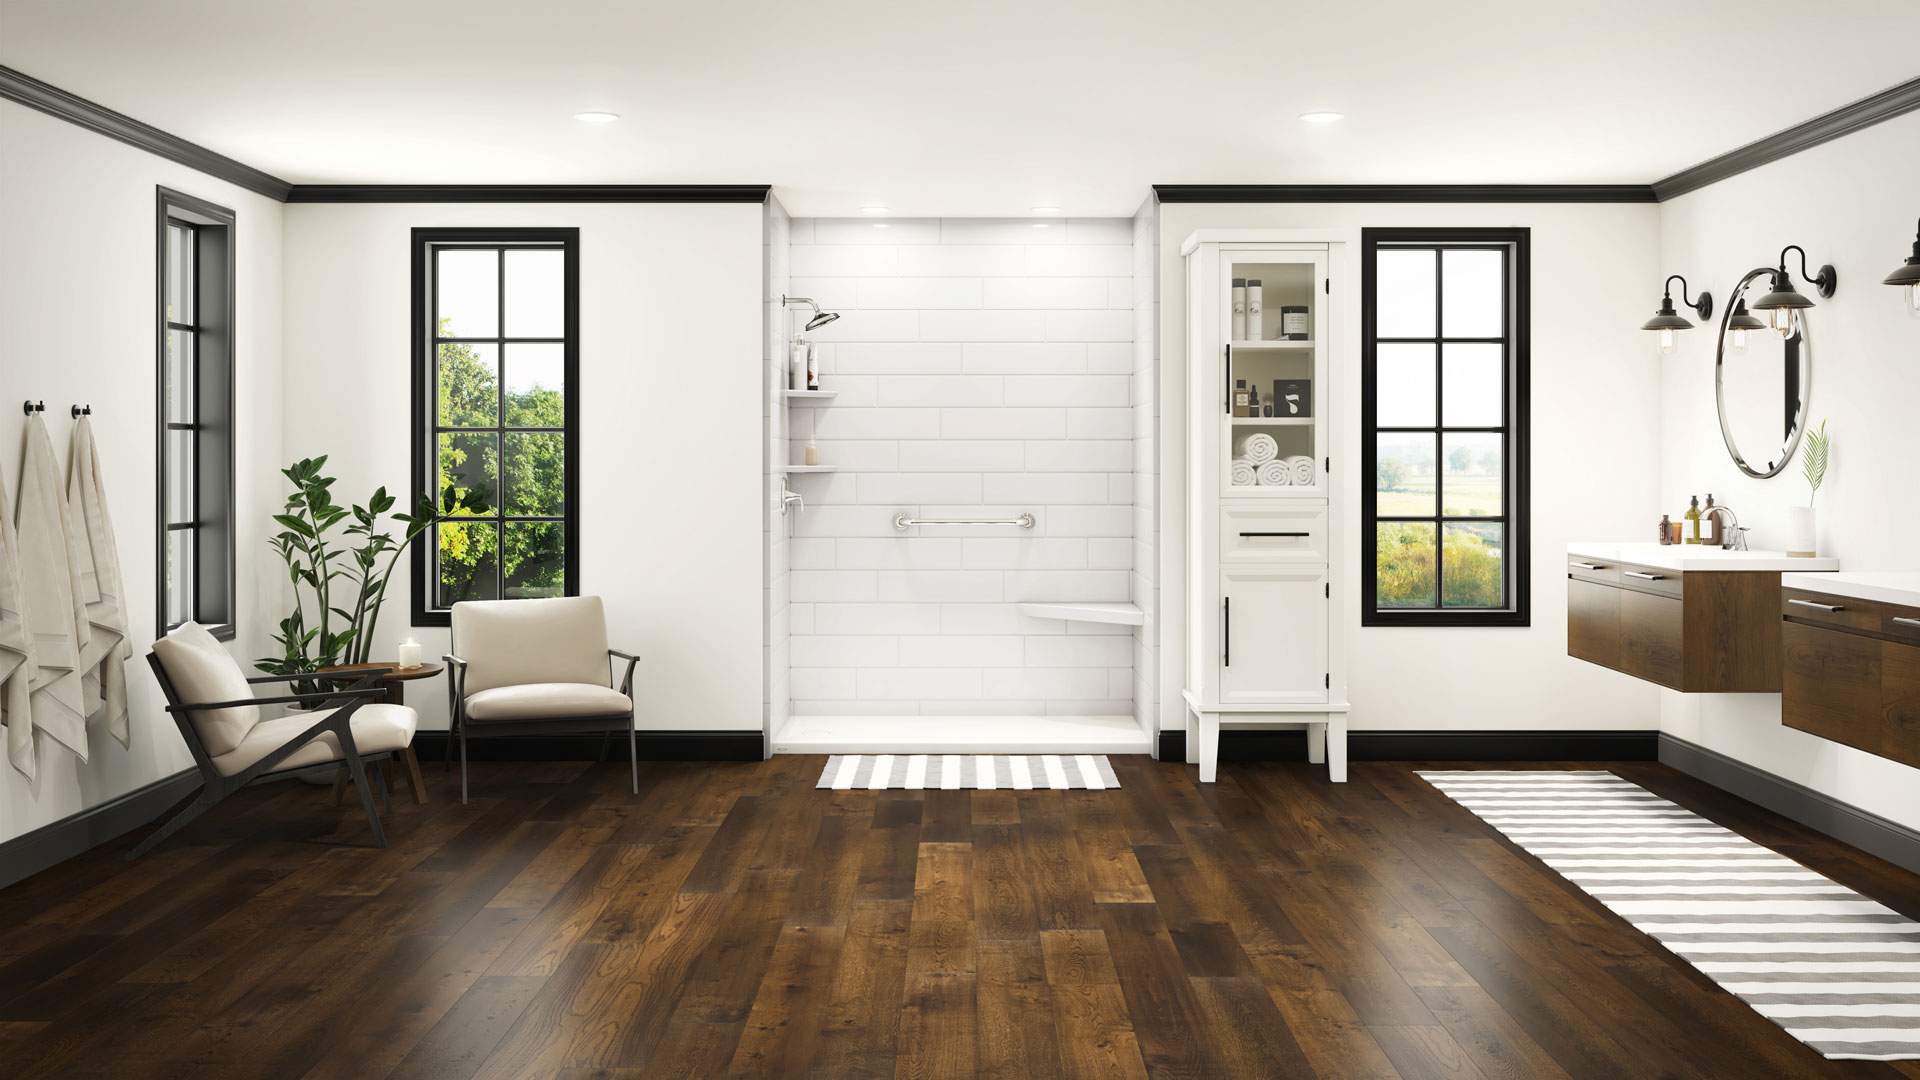 A large bathroom with dark wood flooring, two chairs, and a walk-in shower with white tile walls.